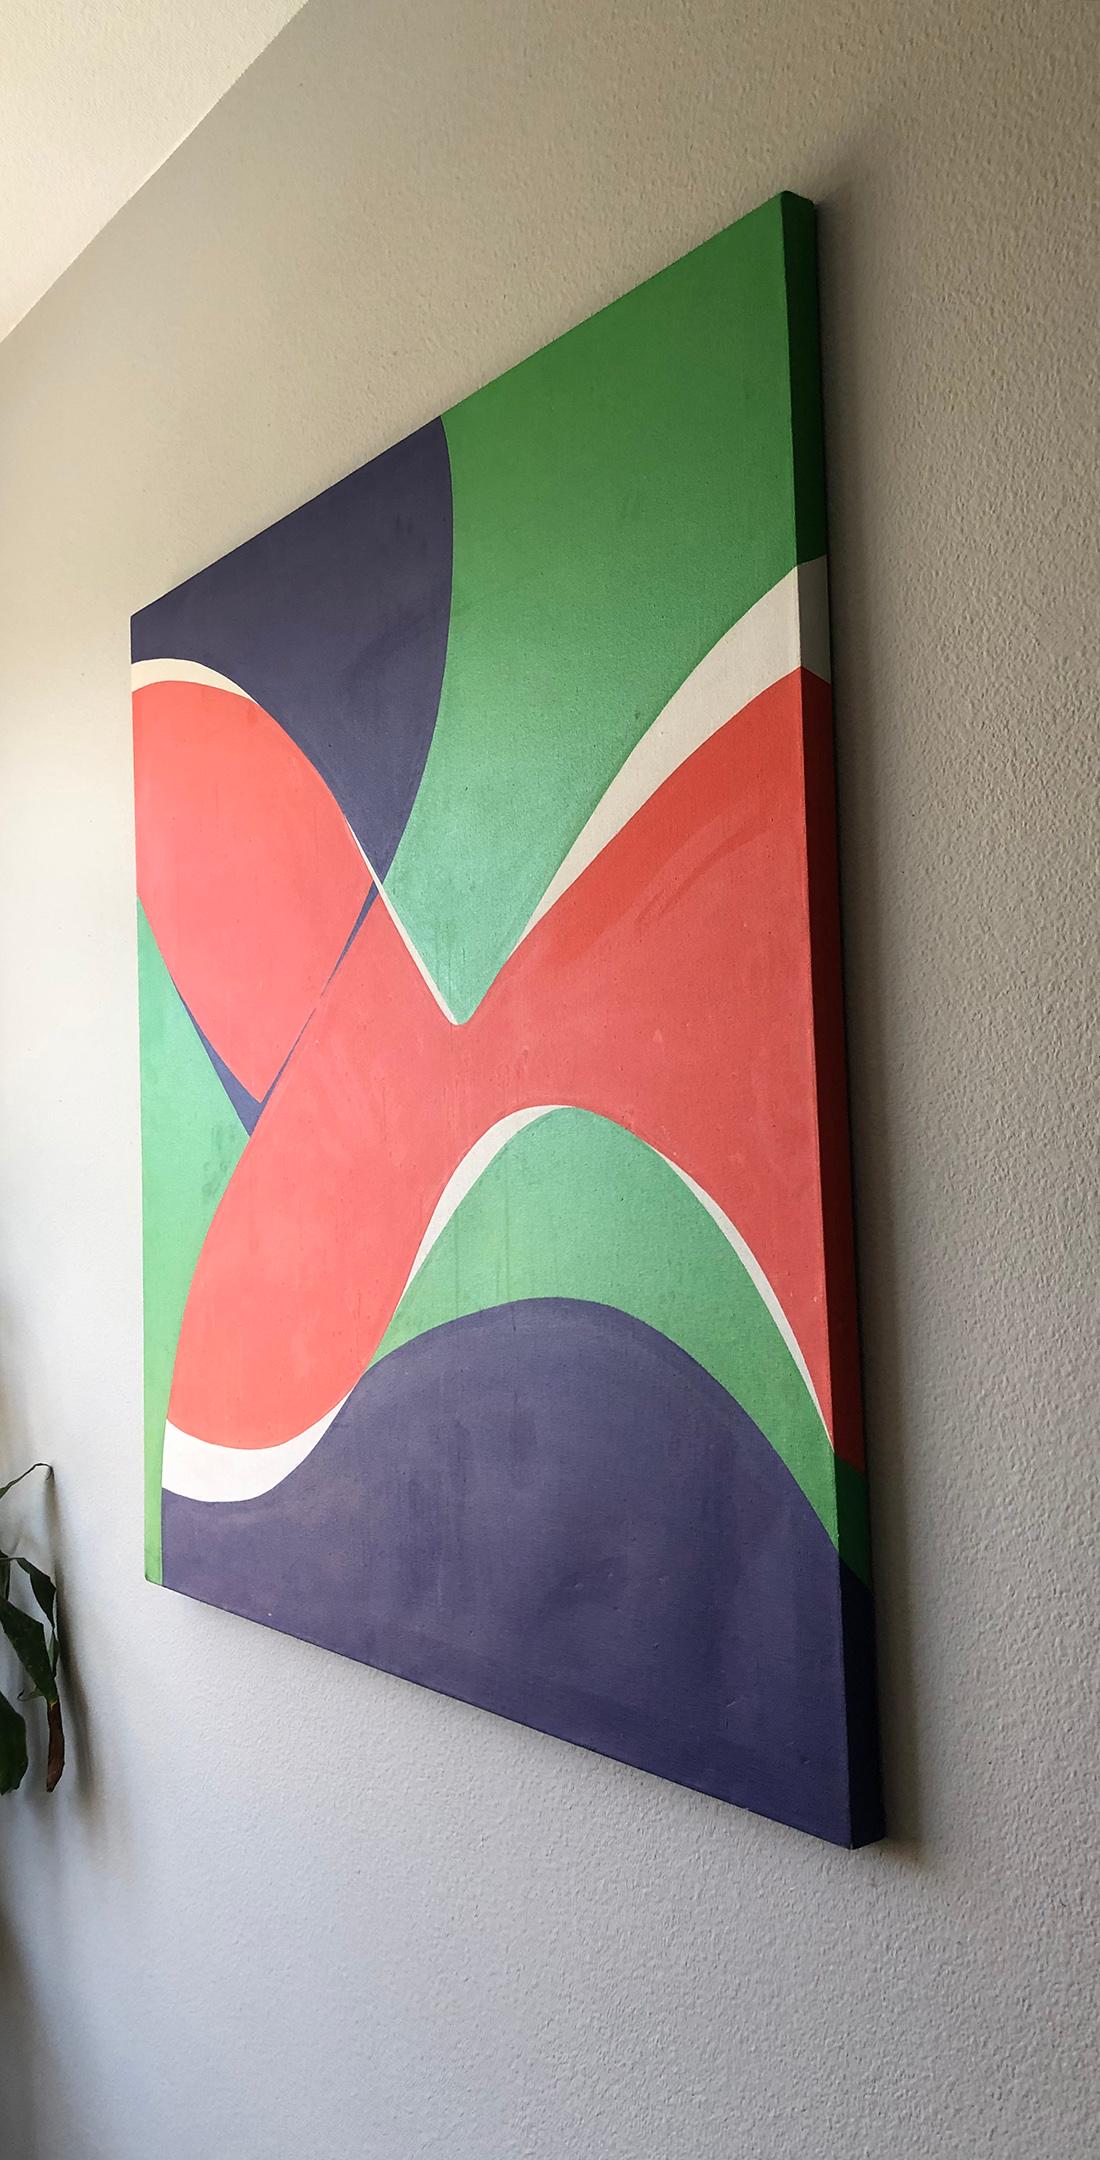 An absolutely gorgeous, large piece of modern art. By placing cool colors alongside of warm or hot colors with curving line, Zwickler creates pieces that are very artistic and visually appealing.

This piece is signed and dated, 1982. This cool